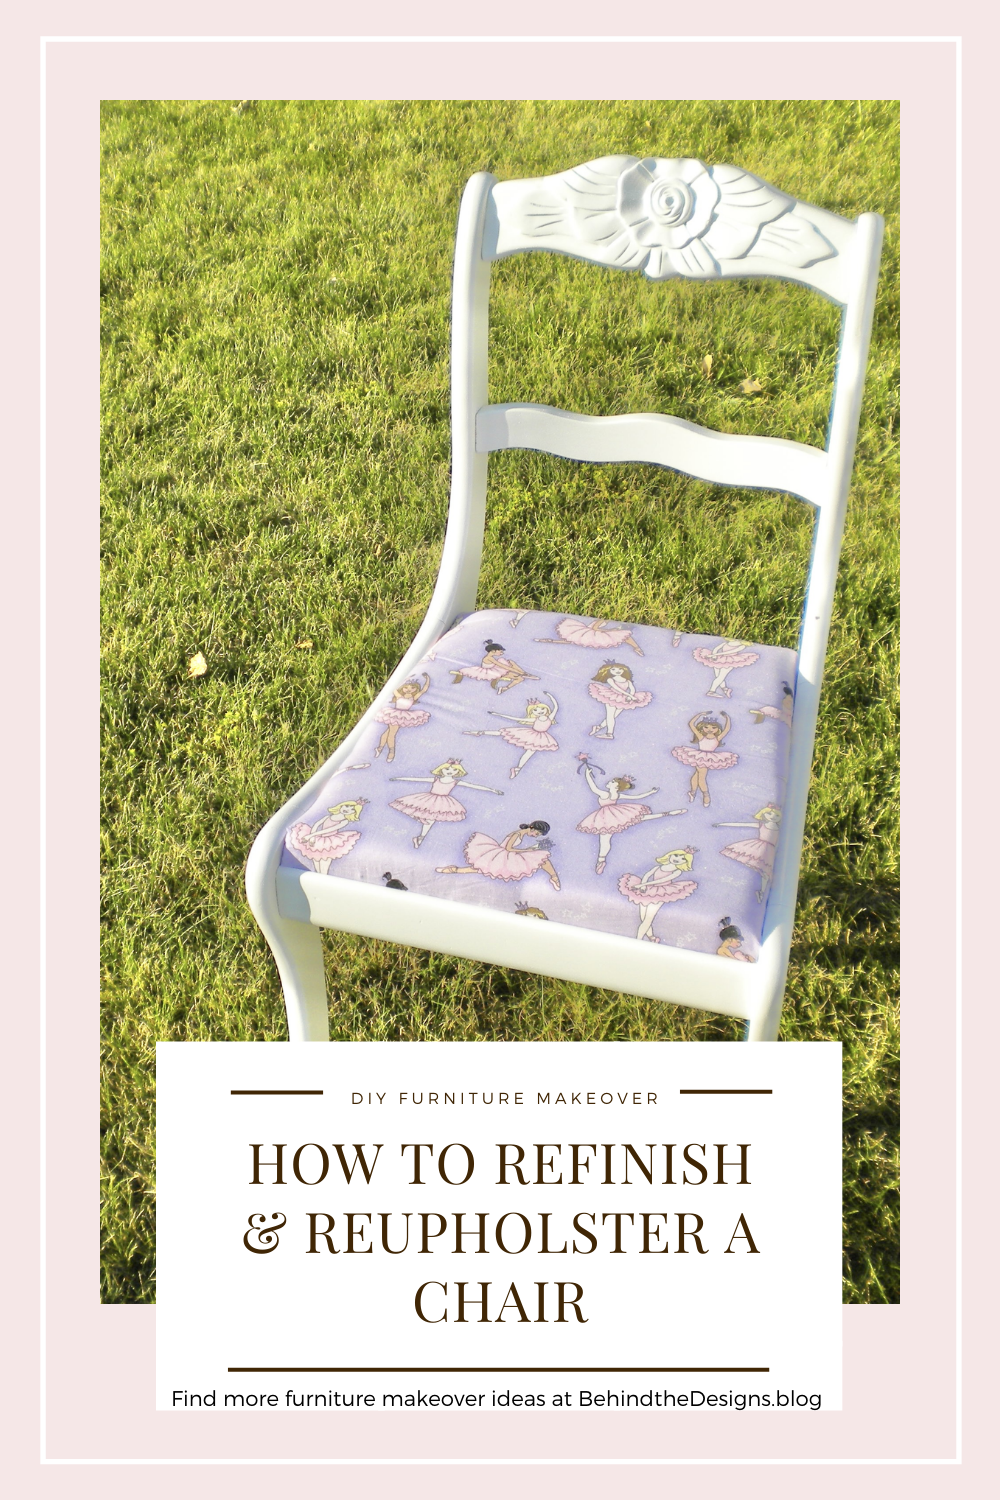 DIY Furniture Makeover How to Refinish and Reupholster a Chair